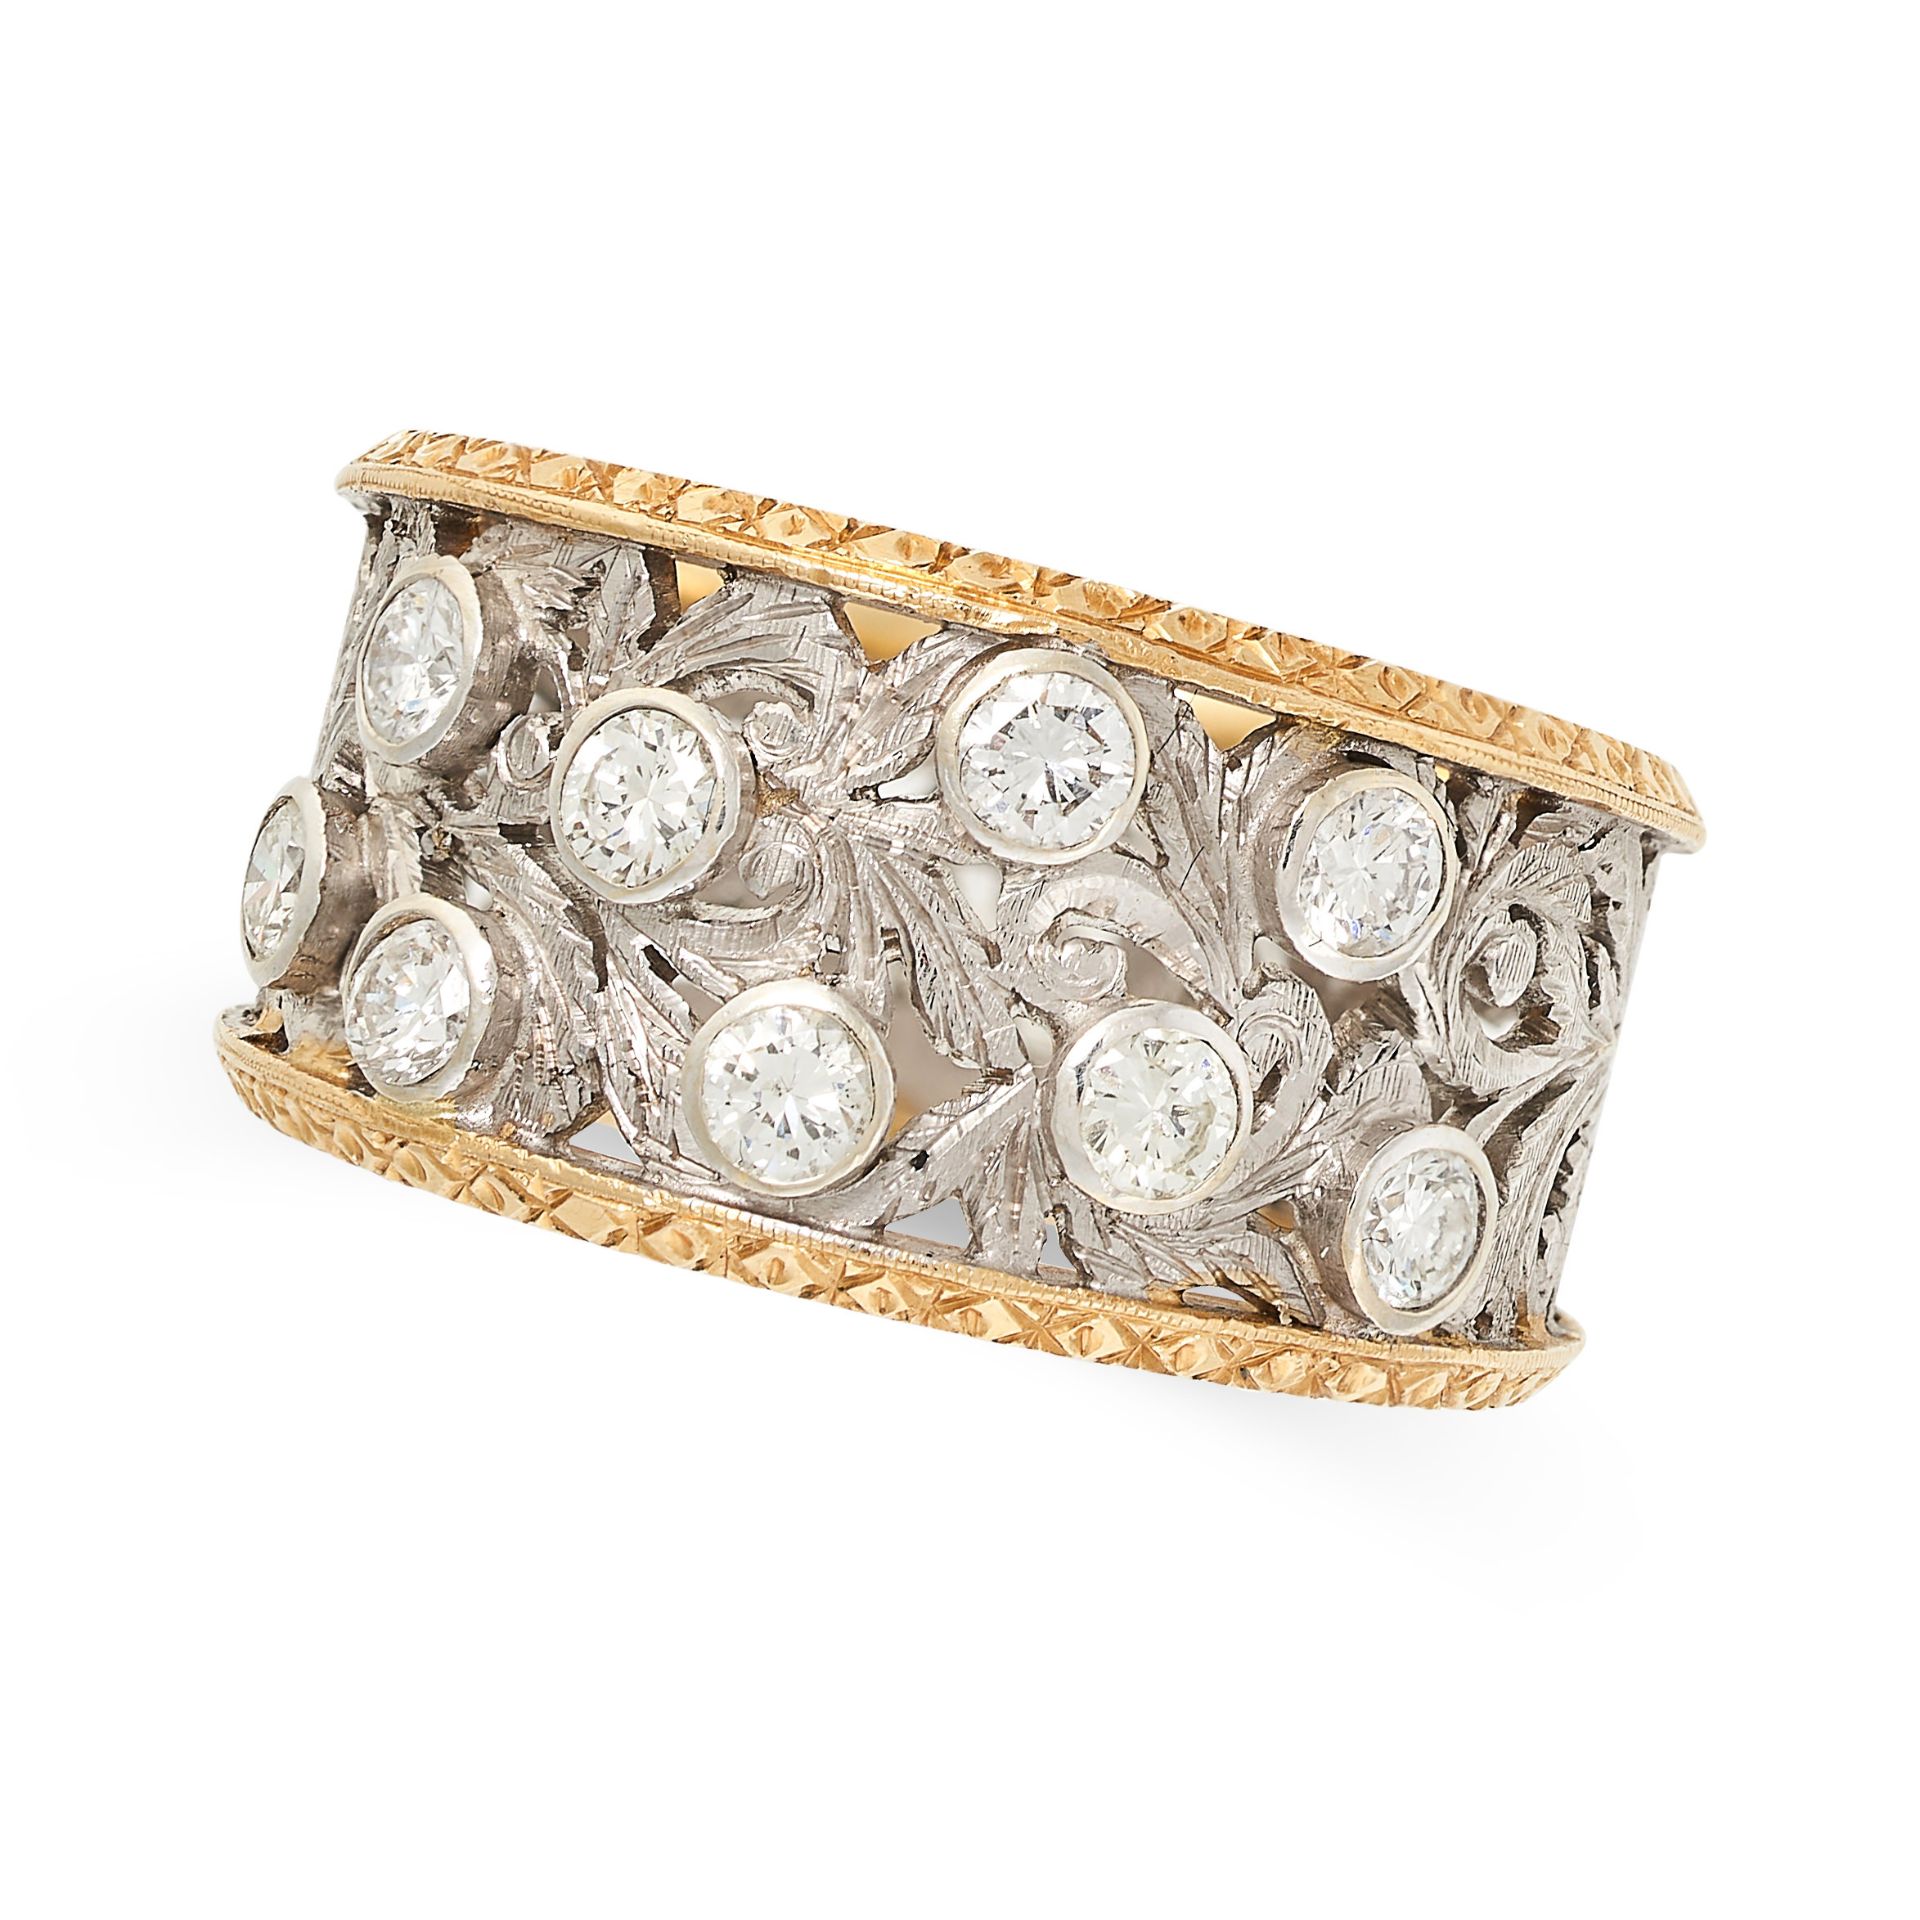 A DIAMOND BAND RING in the manner of Buccellati, in yellow gold and white gold, the openwork band